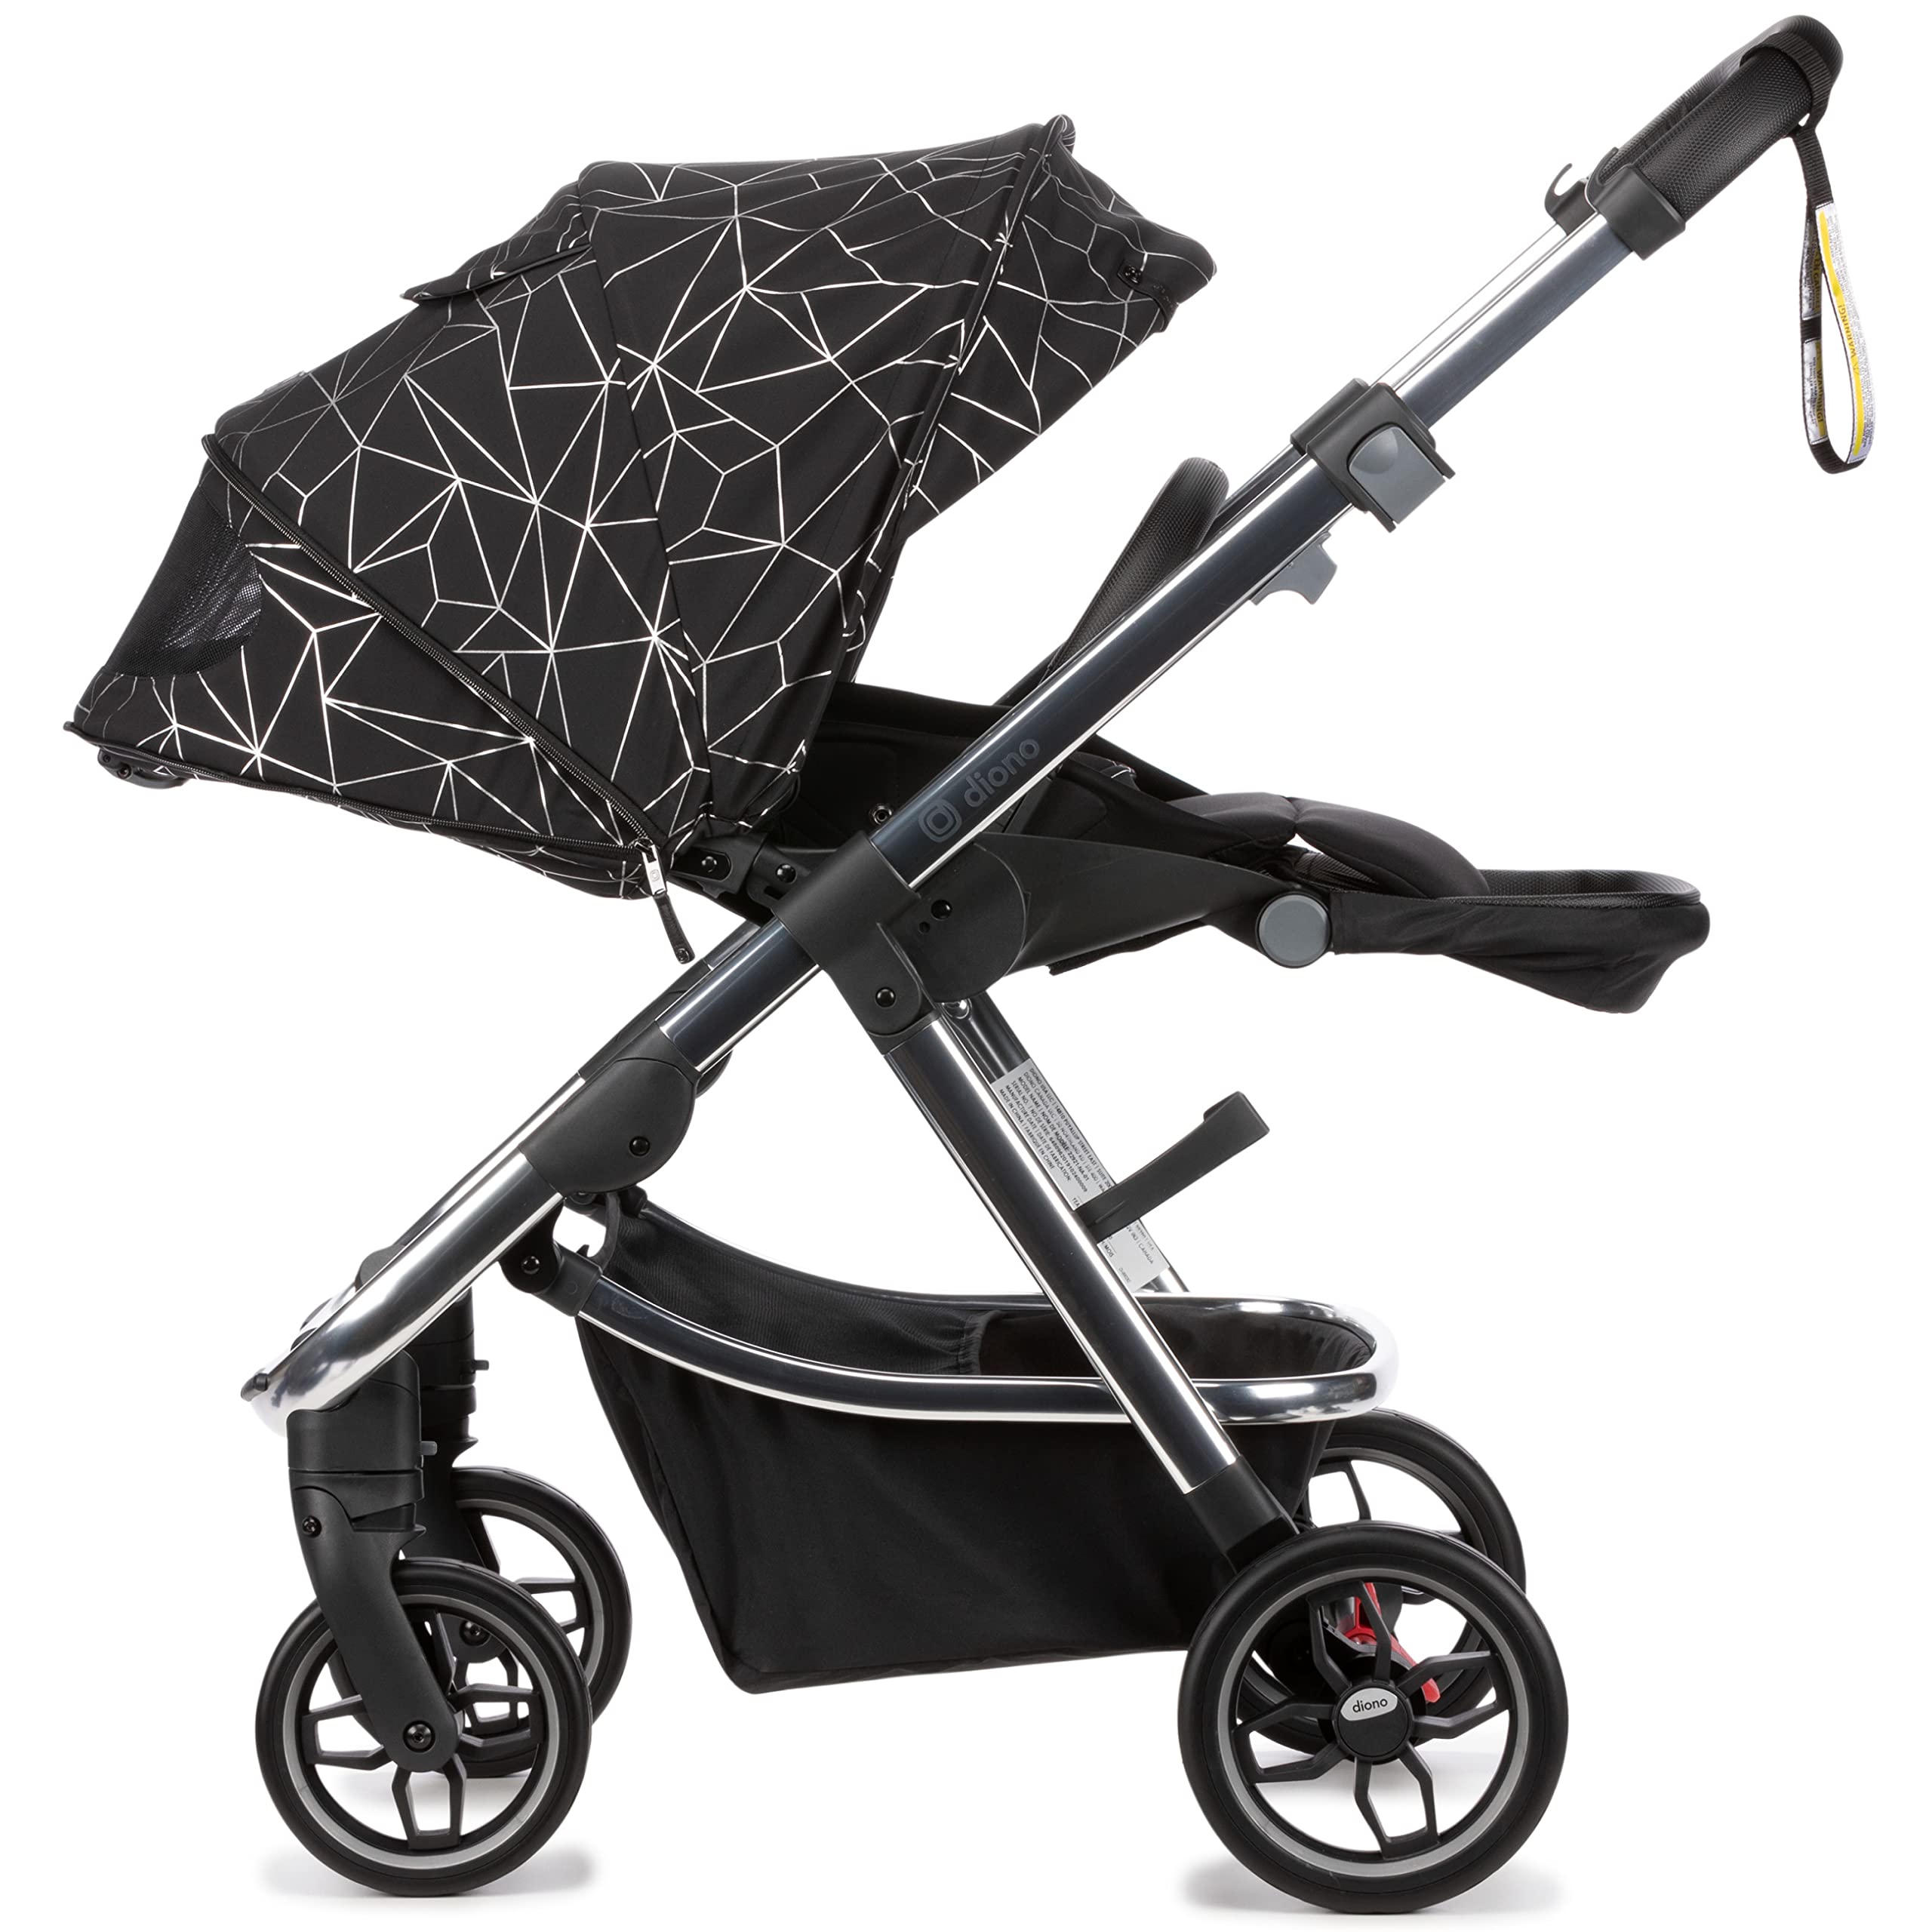 Diono Excurze Luxe Baby, Infant, Toddler Stroller, Perfect City Travel System Stroller and Car Seat Compatible, Adaptors Included Compact Fold, Narrow Ride, XL Storage Basket, Black Platinum